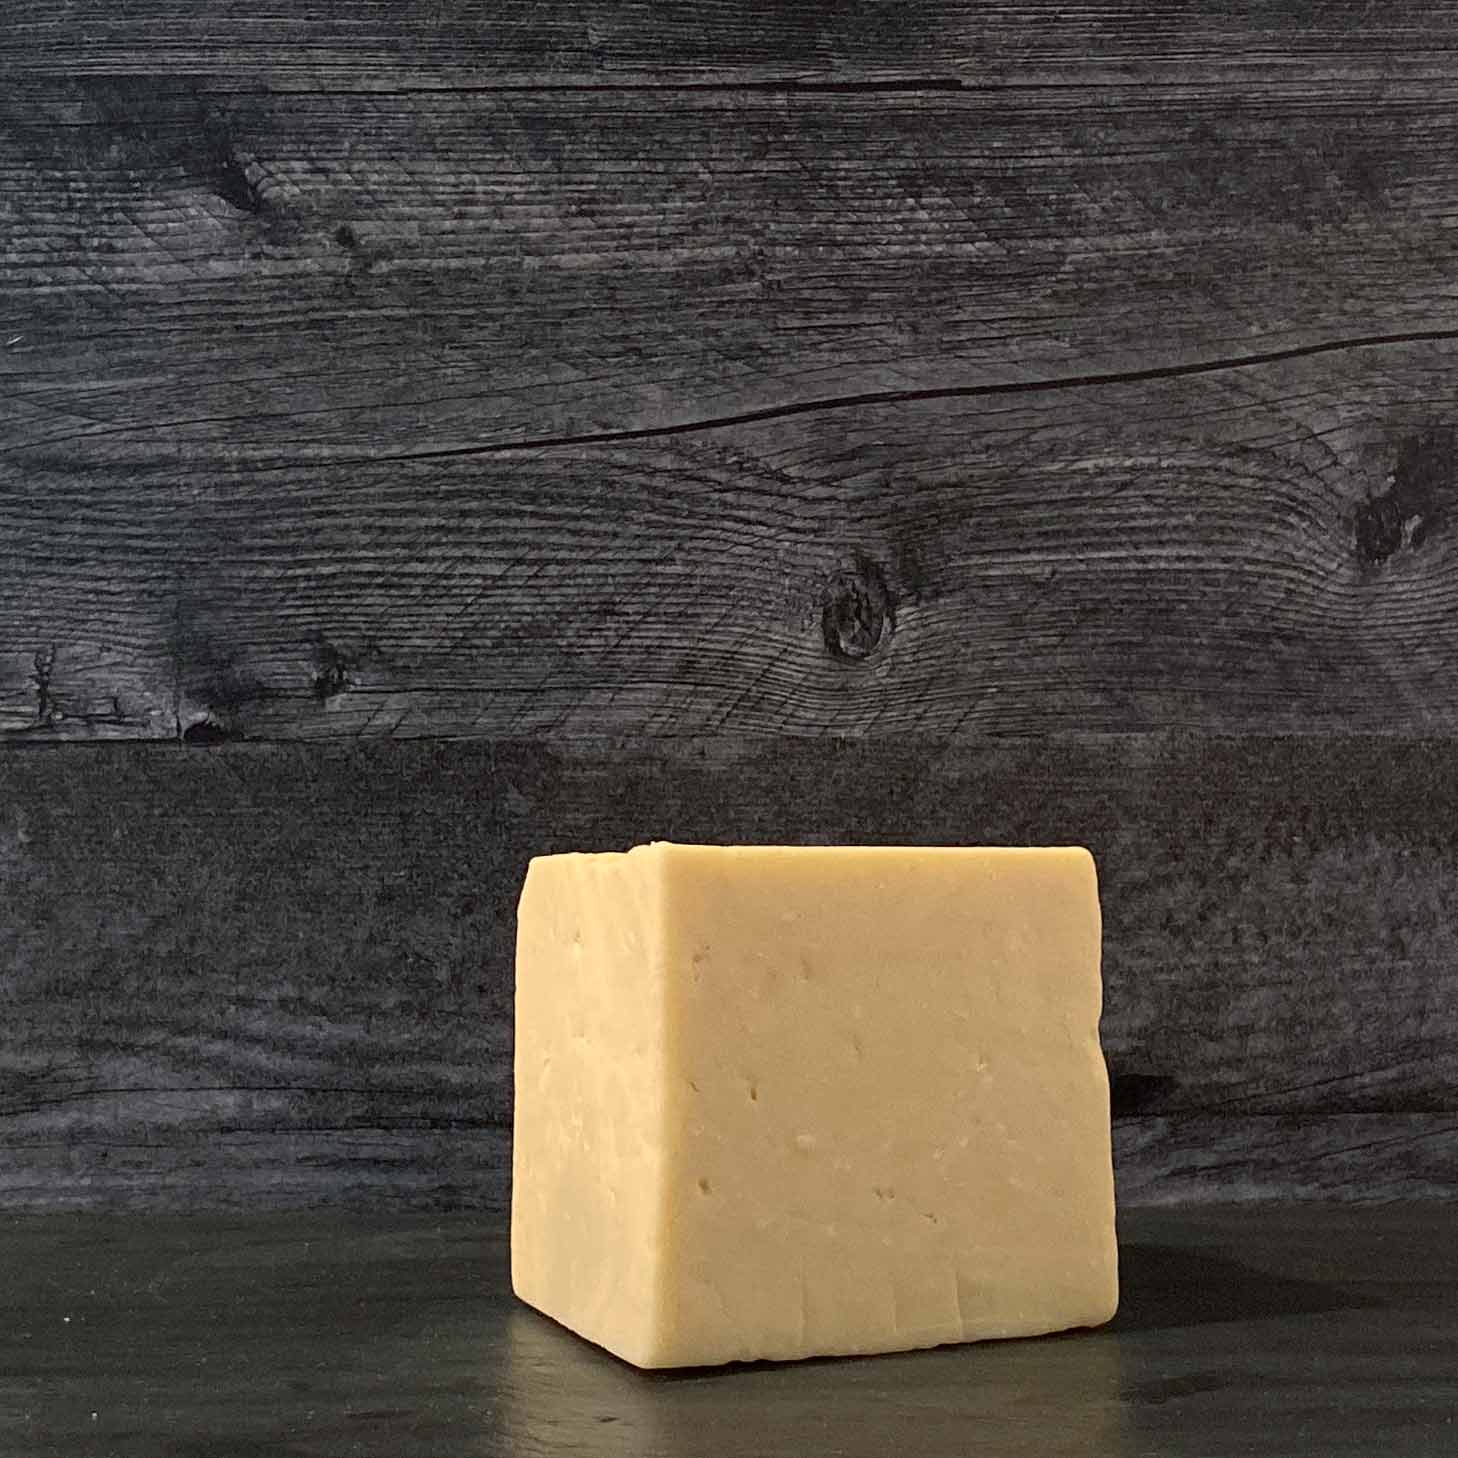 A block of Prairie Breeze Cheddar cheese on a wooden surface